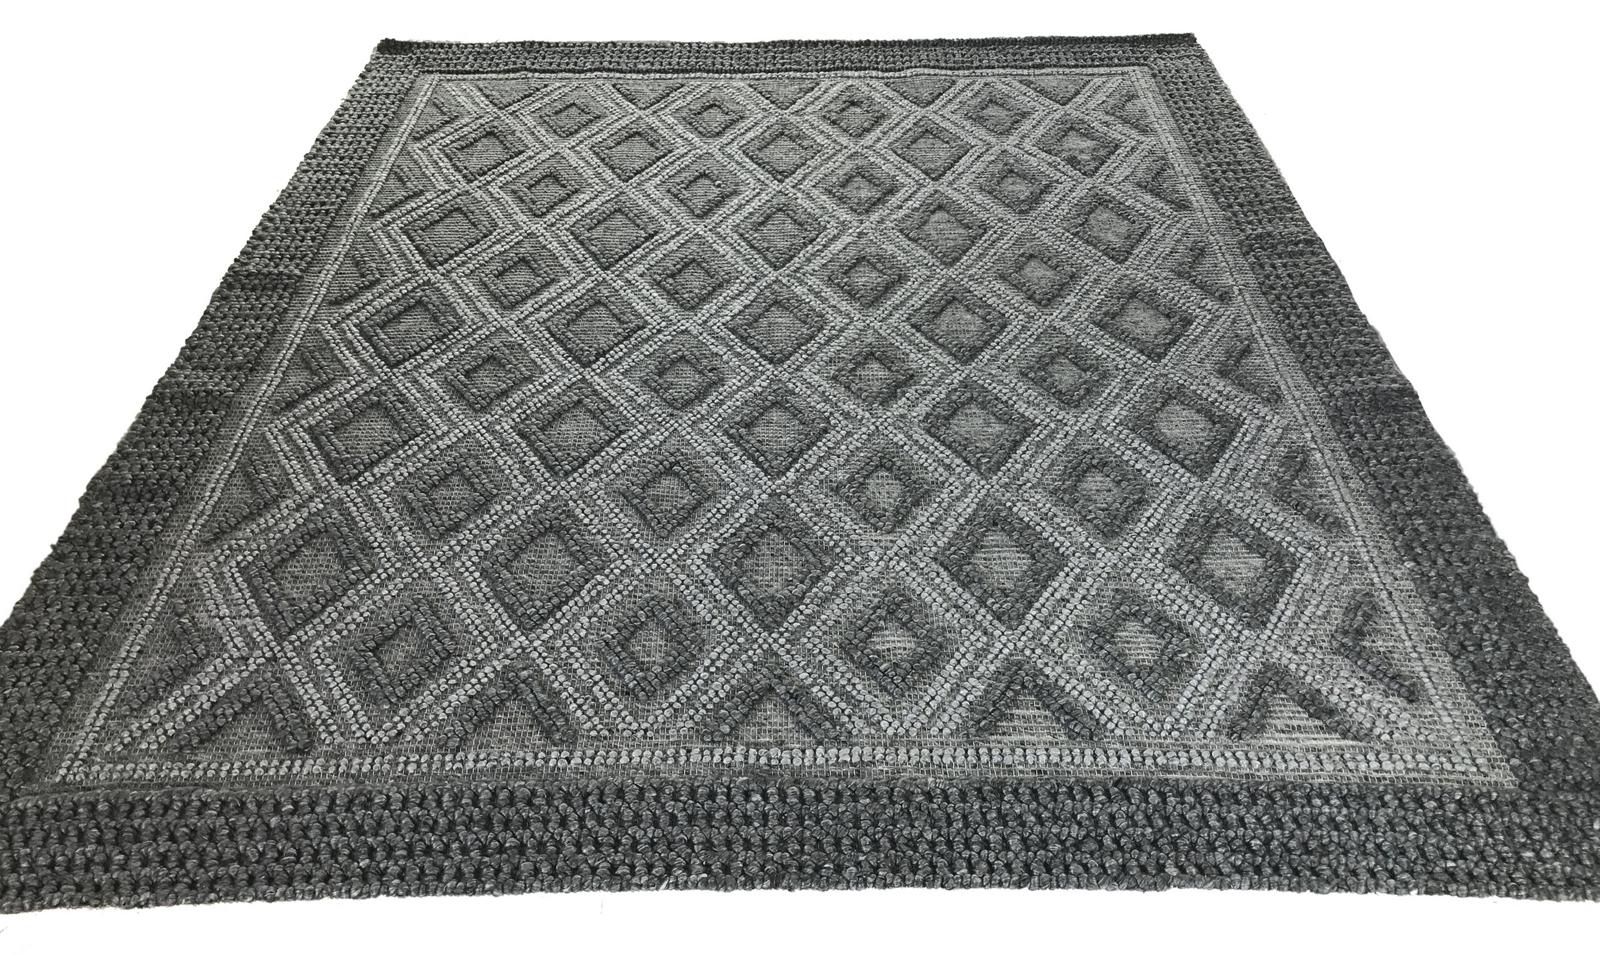 Indian Braided Rug in Black, Gray and Silver In New Condition For Sale In Los Angeles, CA